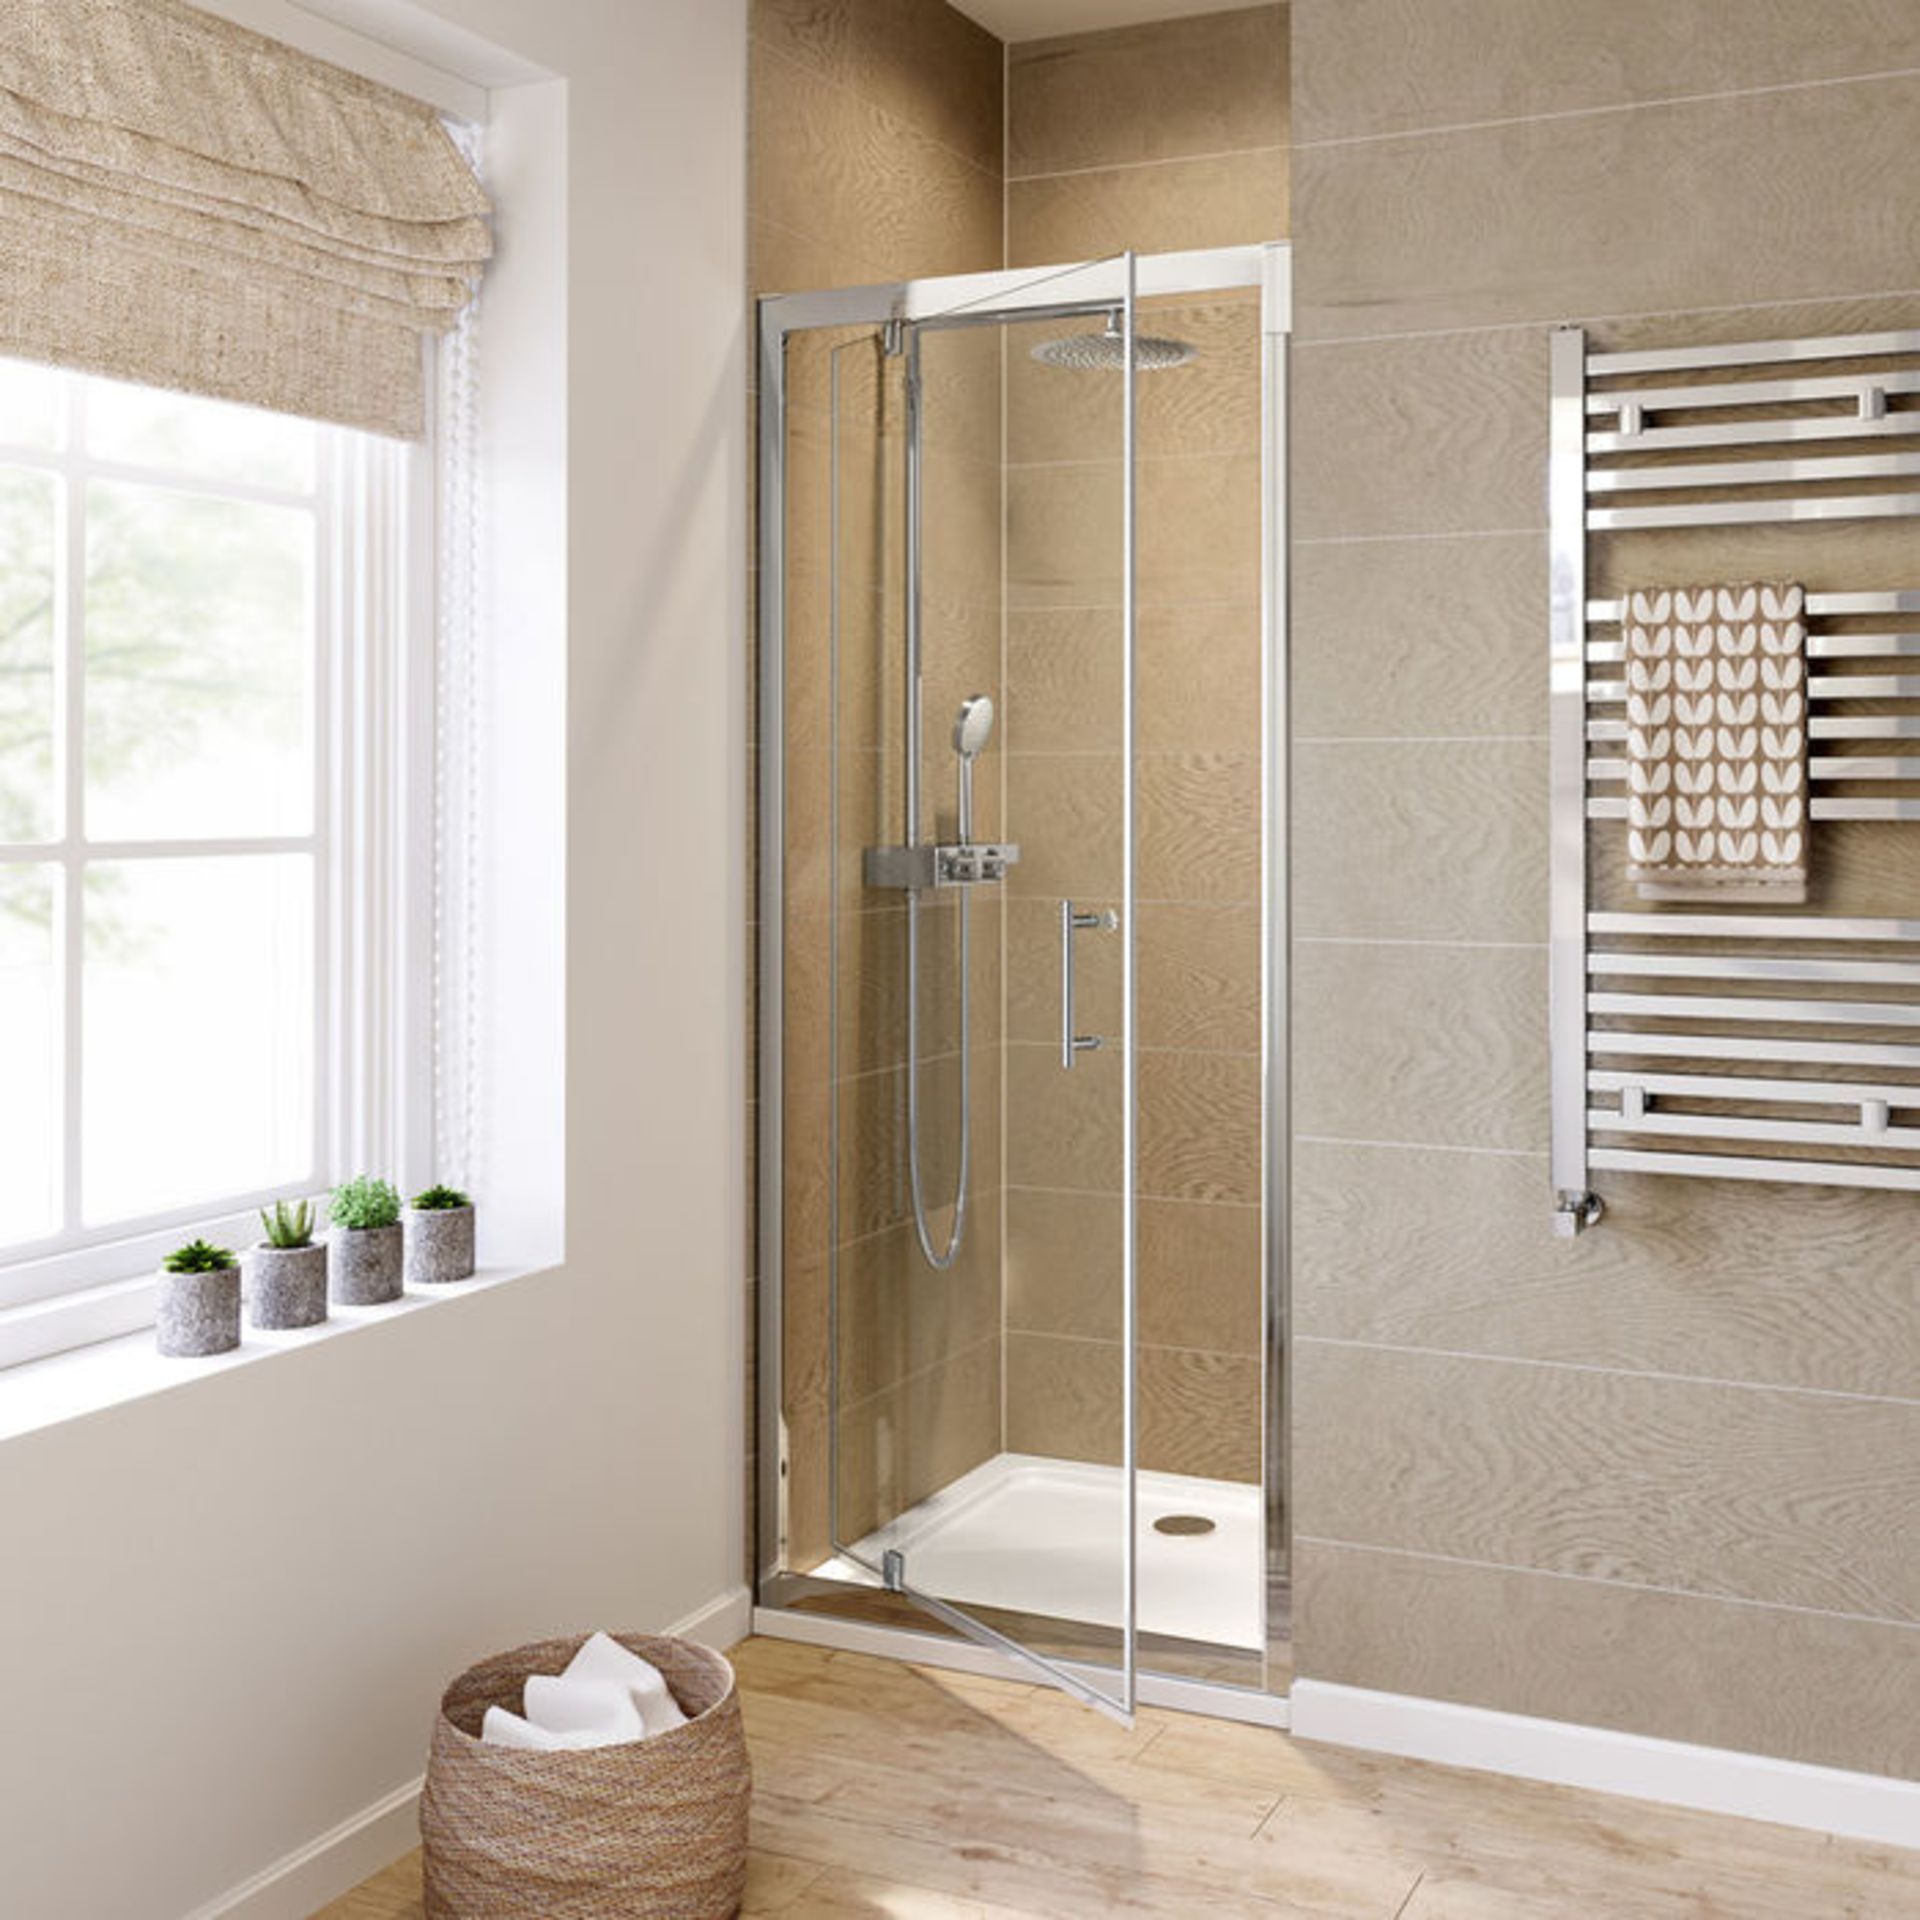 New 700mm - 6mm - Premium Pivot Shower Door RRP £299.99.8mm Safety Glass Fully Waterproof Test... - Image 2 of 2